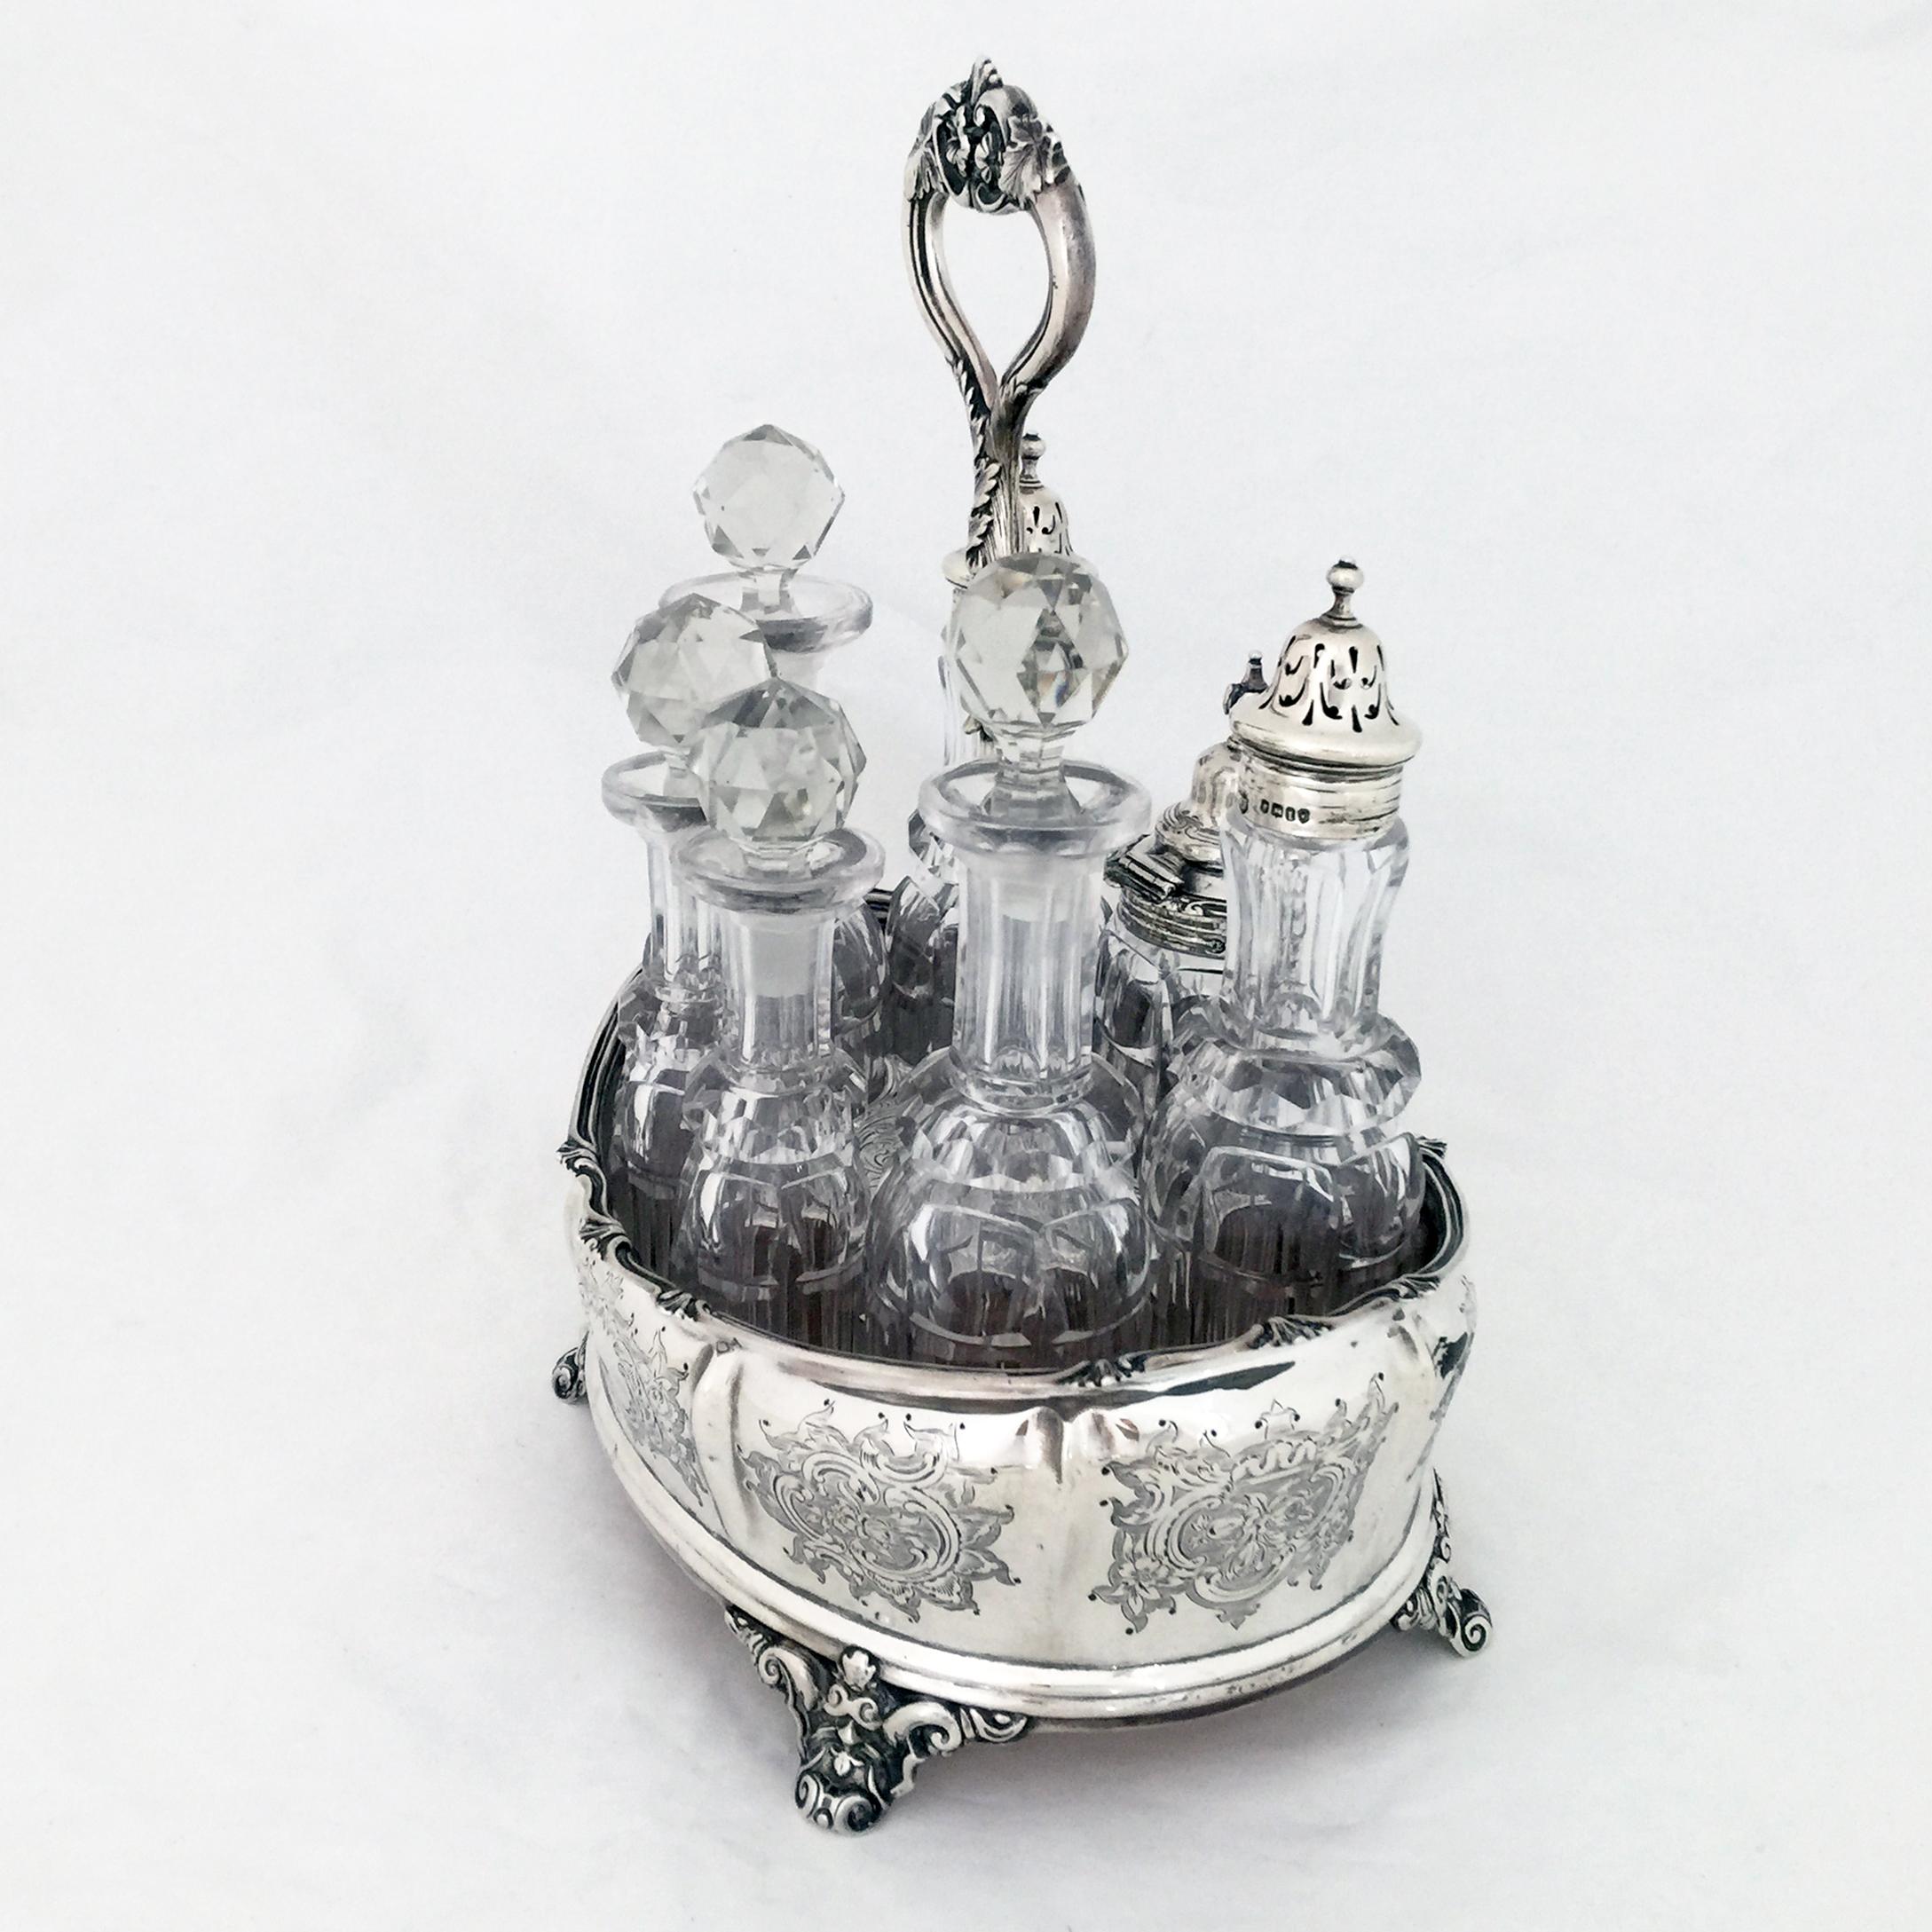 A Victorian English silver cruet with all original seven crystal bottles in fine order

Cruets like this date from an era when food was served fairly bland and each diner would add his or her spice -chili  oils, nutmeg , salt and pepper and